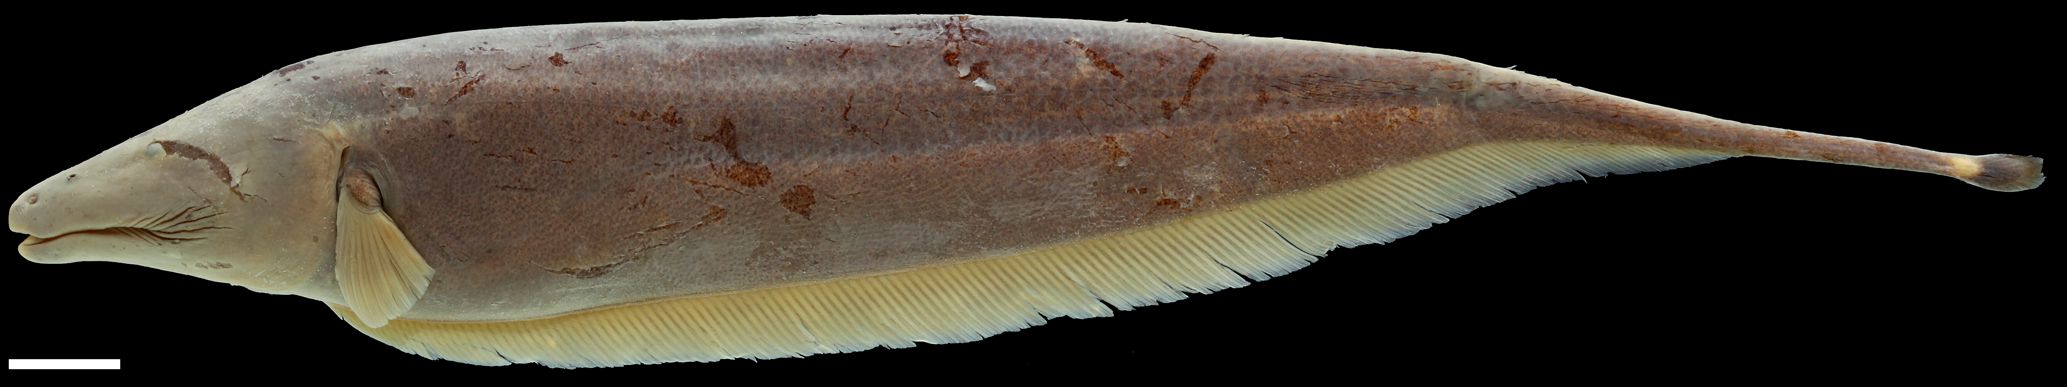 Holotype of <em>Apteronotus galvisi</em>, IAvH-P-8133_Lateral, 184.4 mm TL (scale bar = 1 cm). Photograph by C. DoNascimiento